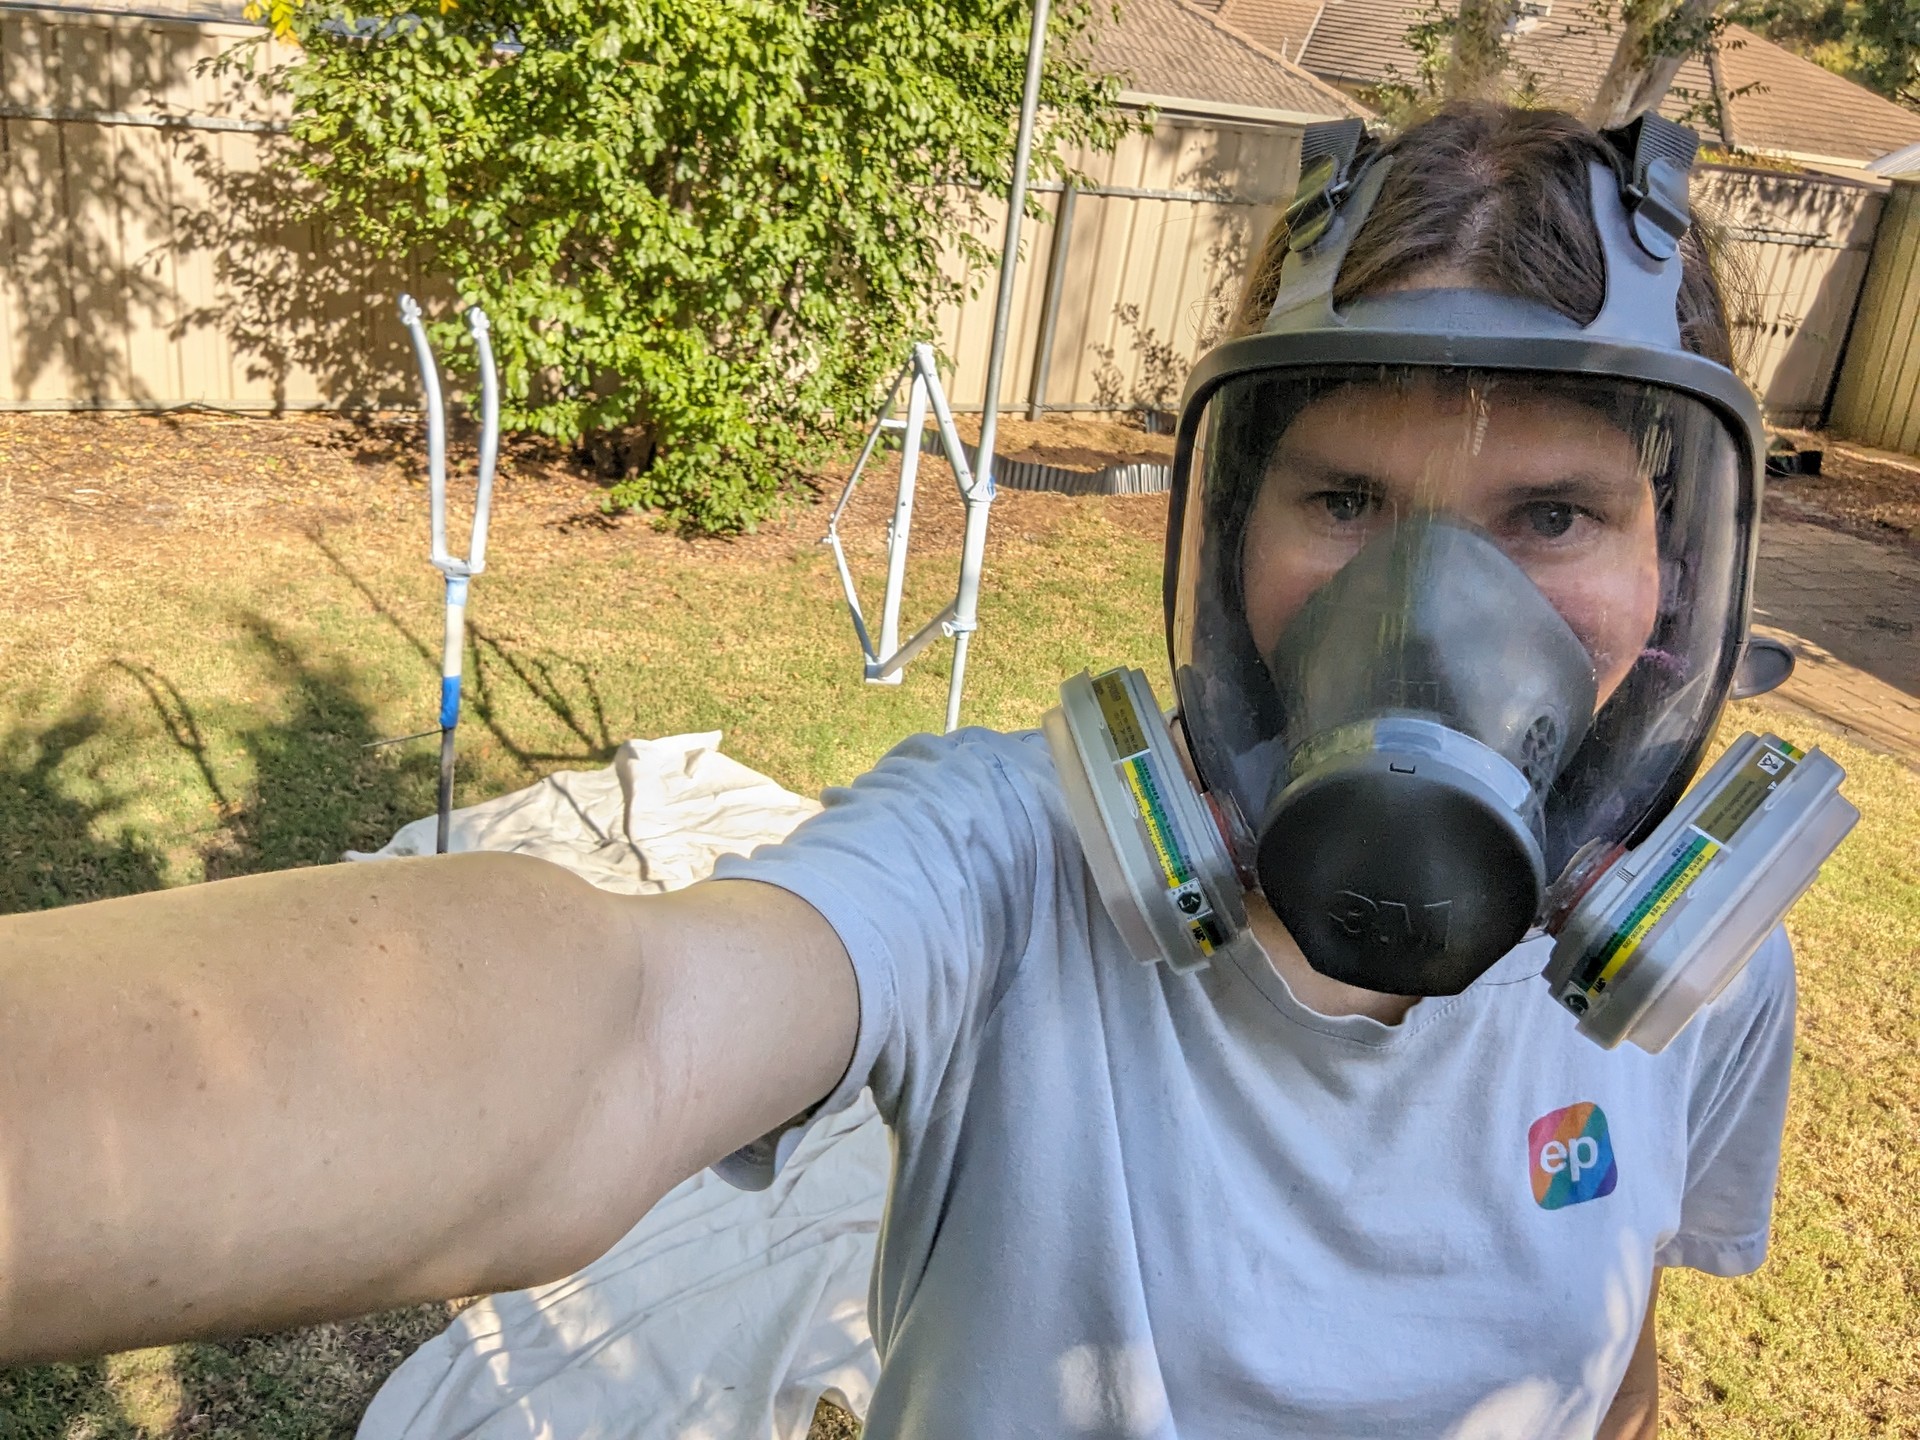 Selfie of me in full face respirator with bike in background